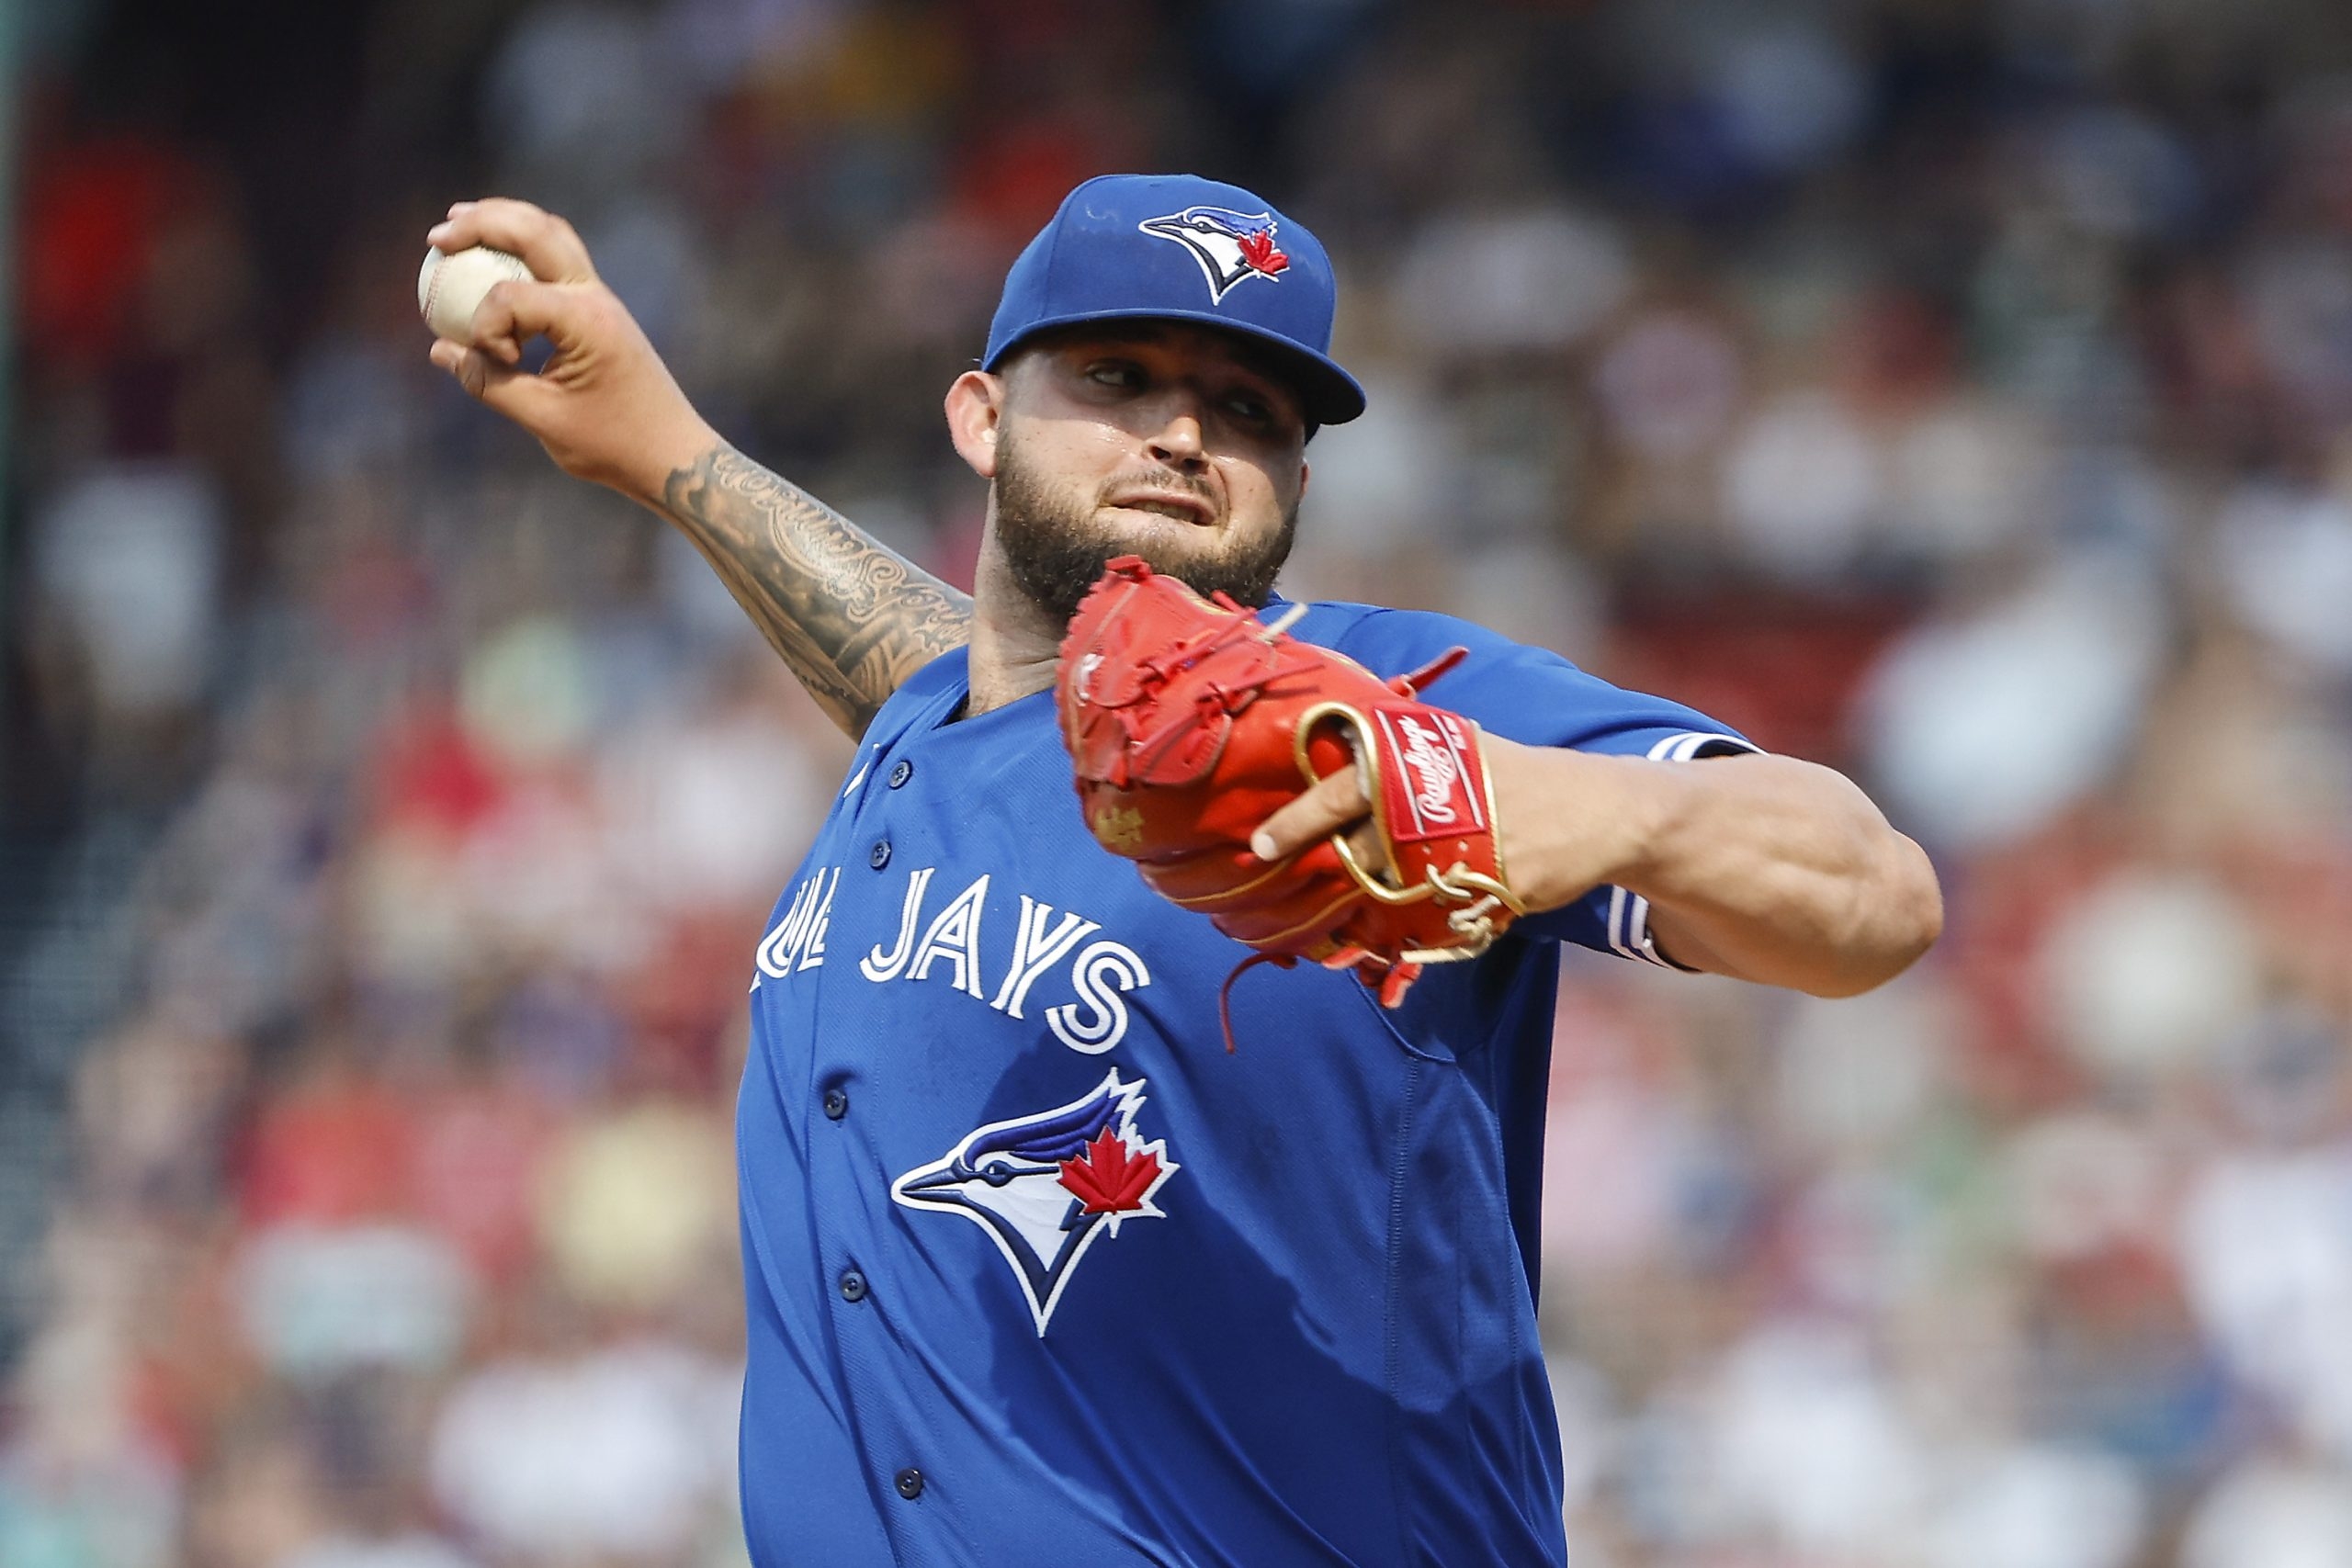 SIMMONS SUNDAY: Blue Jays pitcher Alek Manoah is his own kind of star